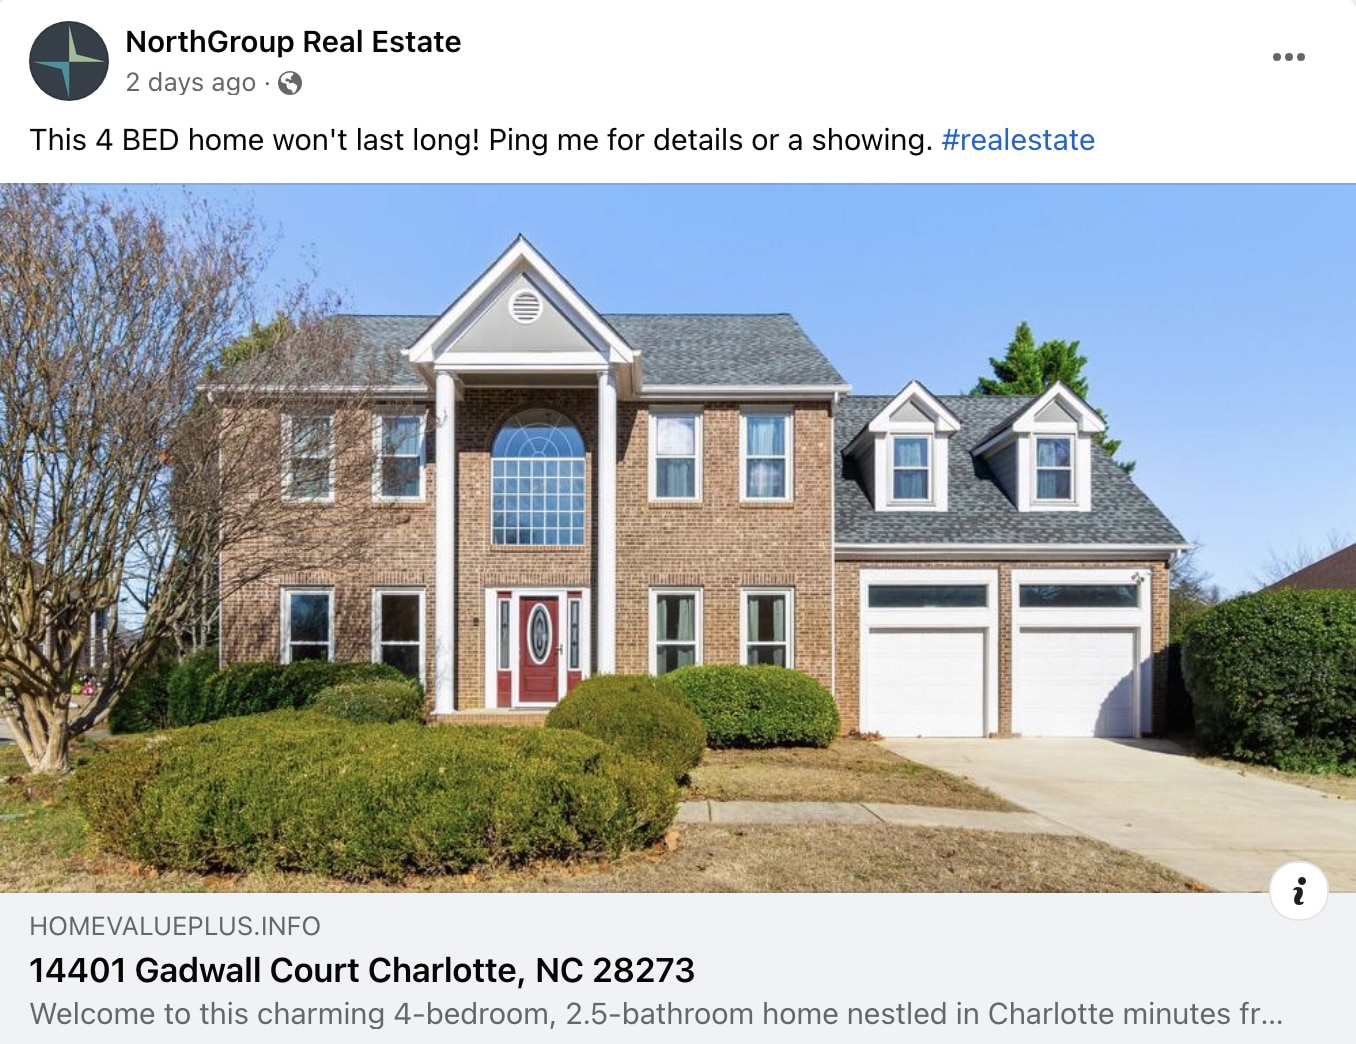 Facebook real estate example - NorthGroup Real Estate